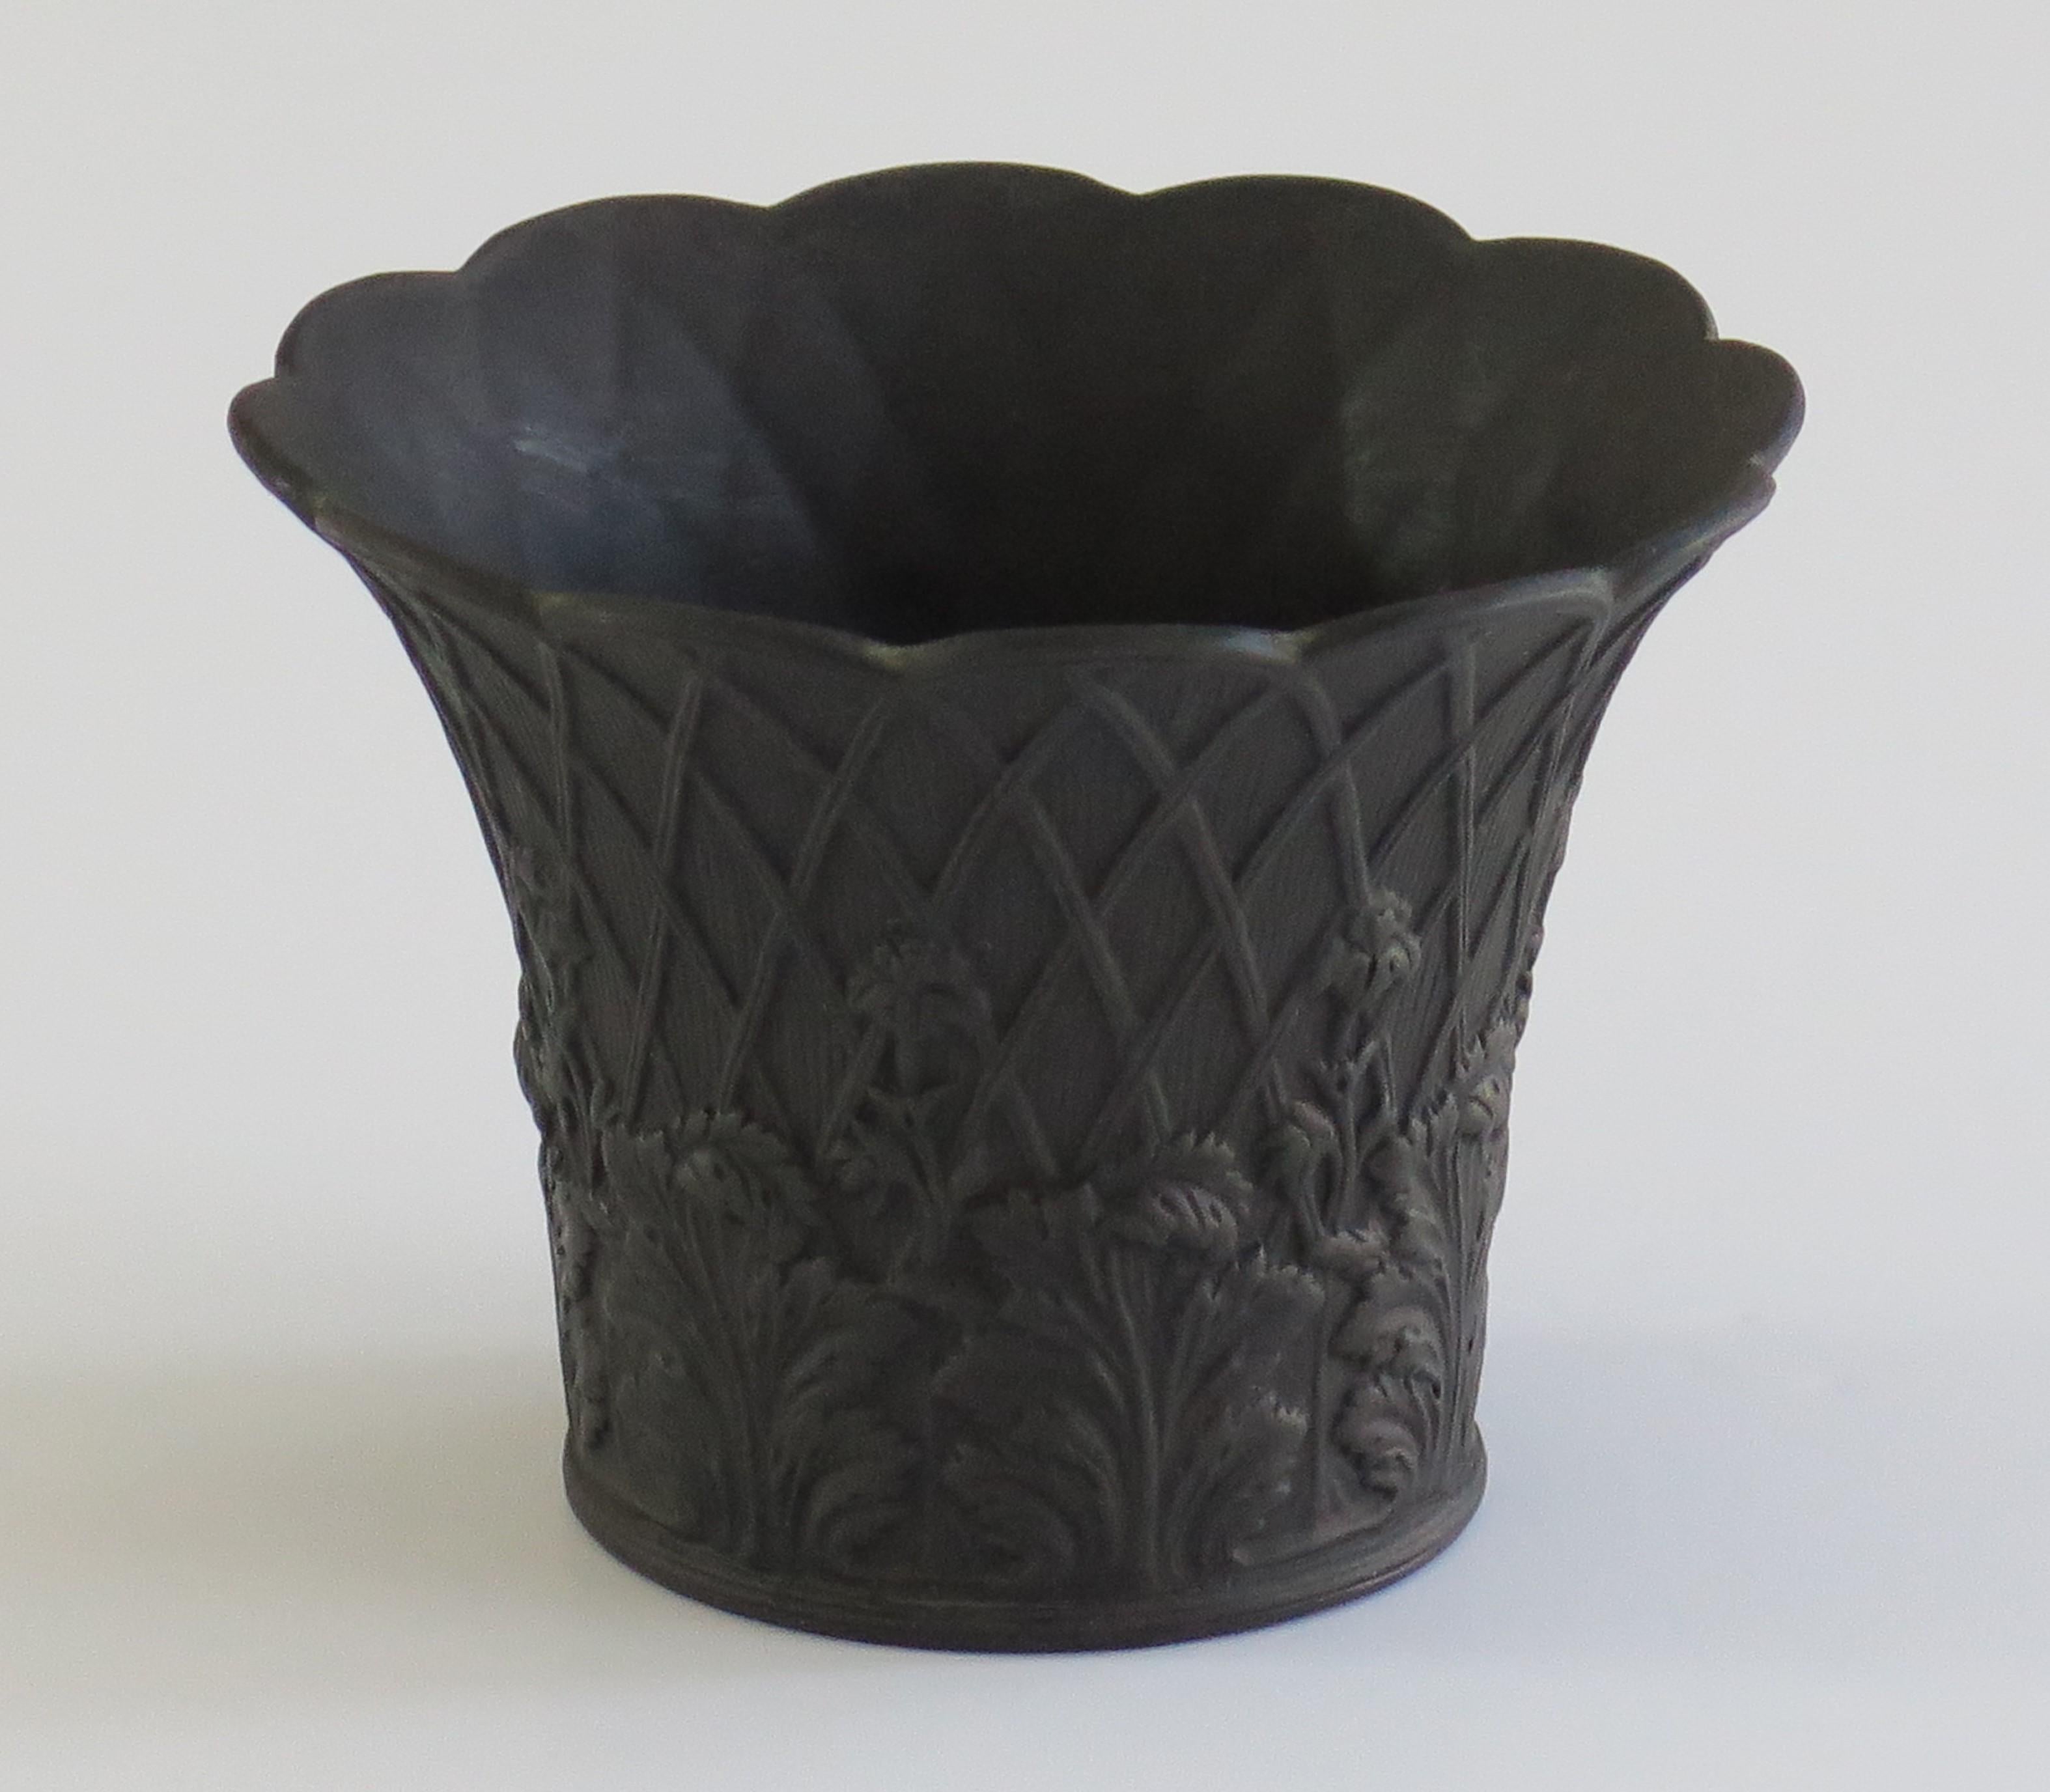 Hand-Crafted Wedgwood Black Basalt Flowerpot in Trellis Pattern, English Early 20th Century For Sale